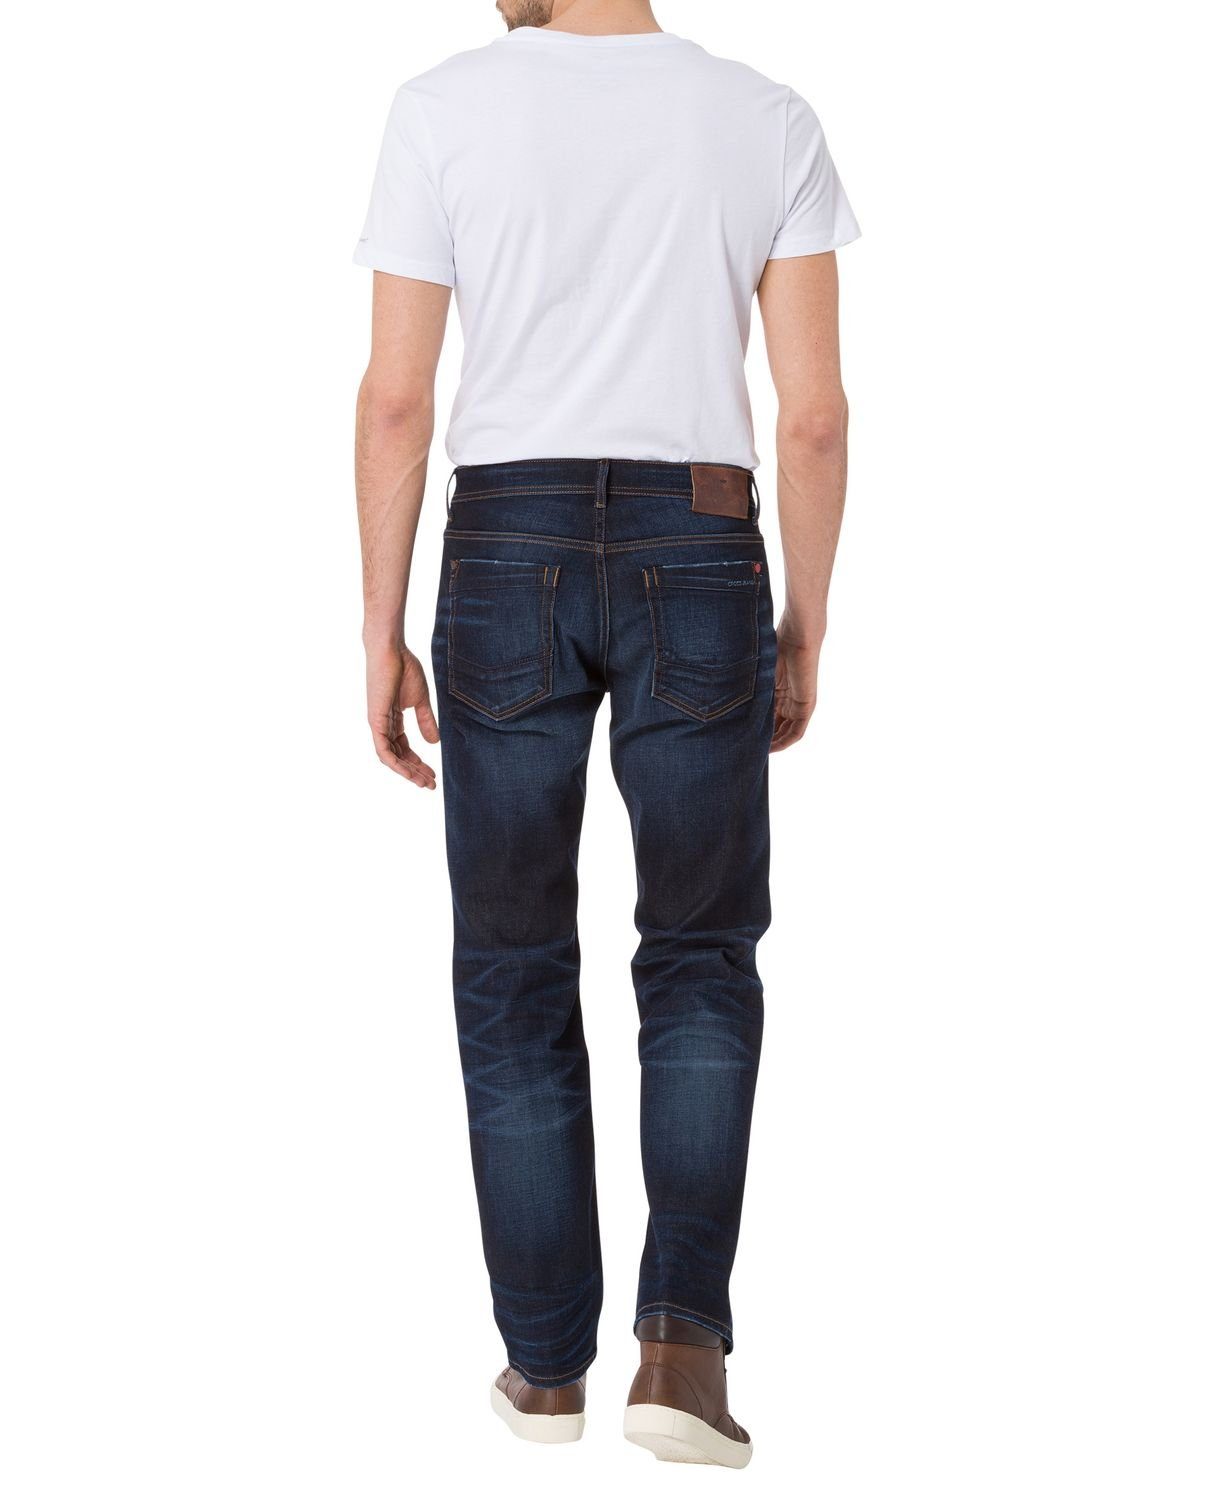 Jeanshose Stretch JEANS® CROSS Antonio Tapered-fit-Jeans mit